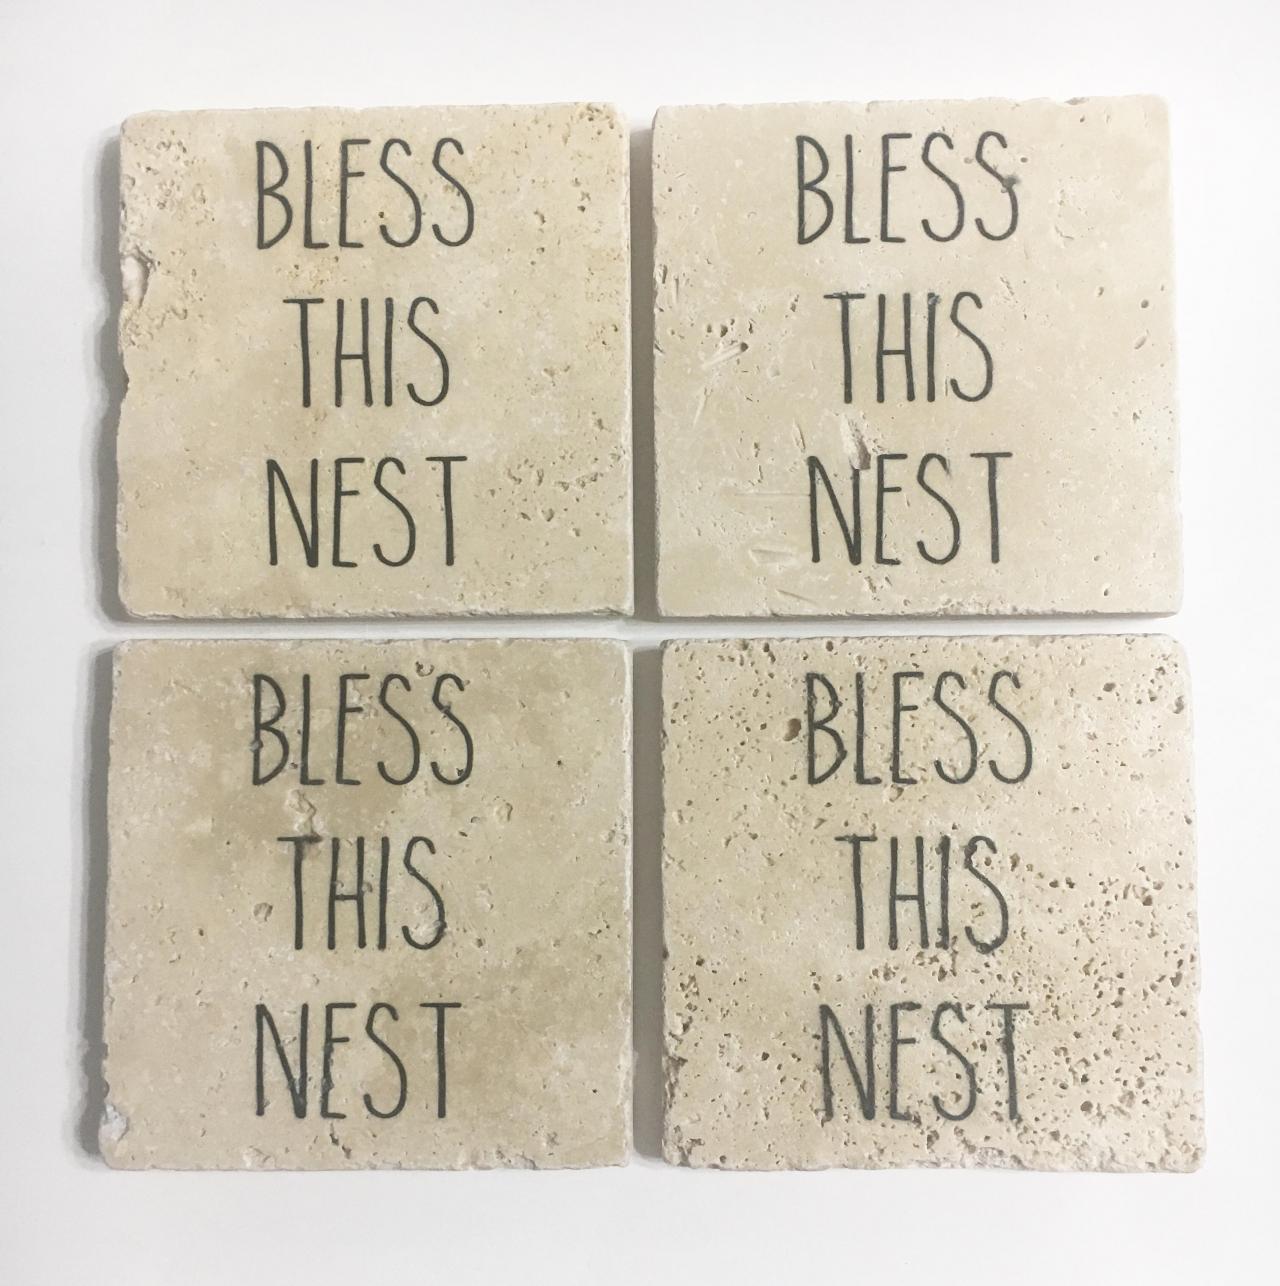 Bless This Nest Coasters, Rae Dunn Inspired, Natural Stone, Set Of 4